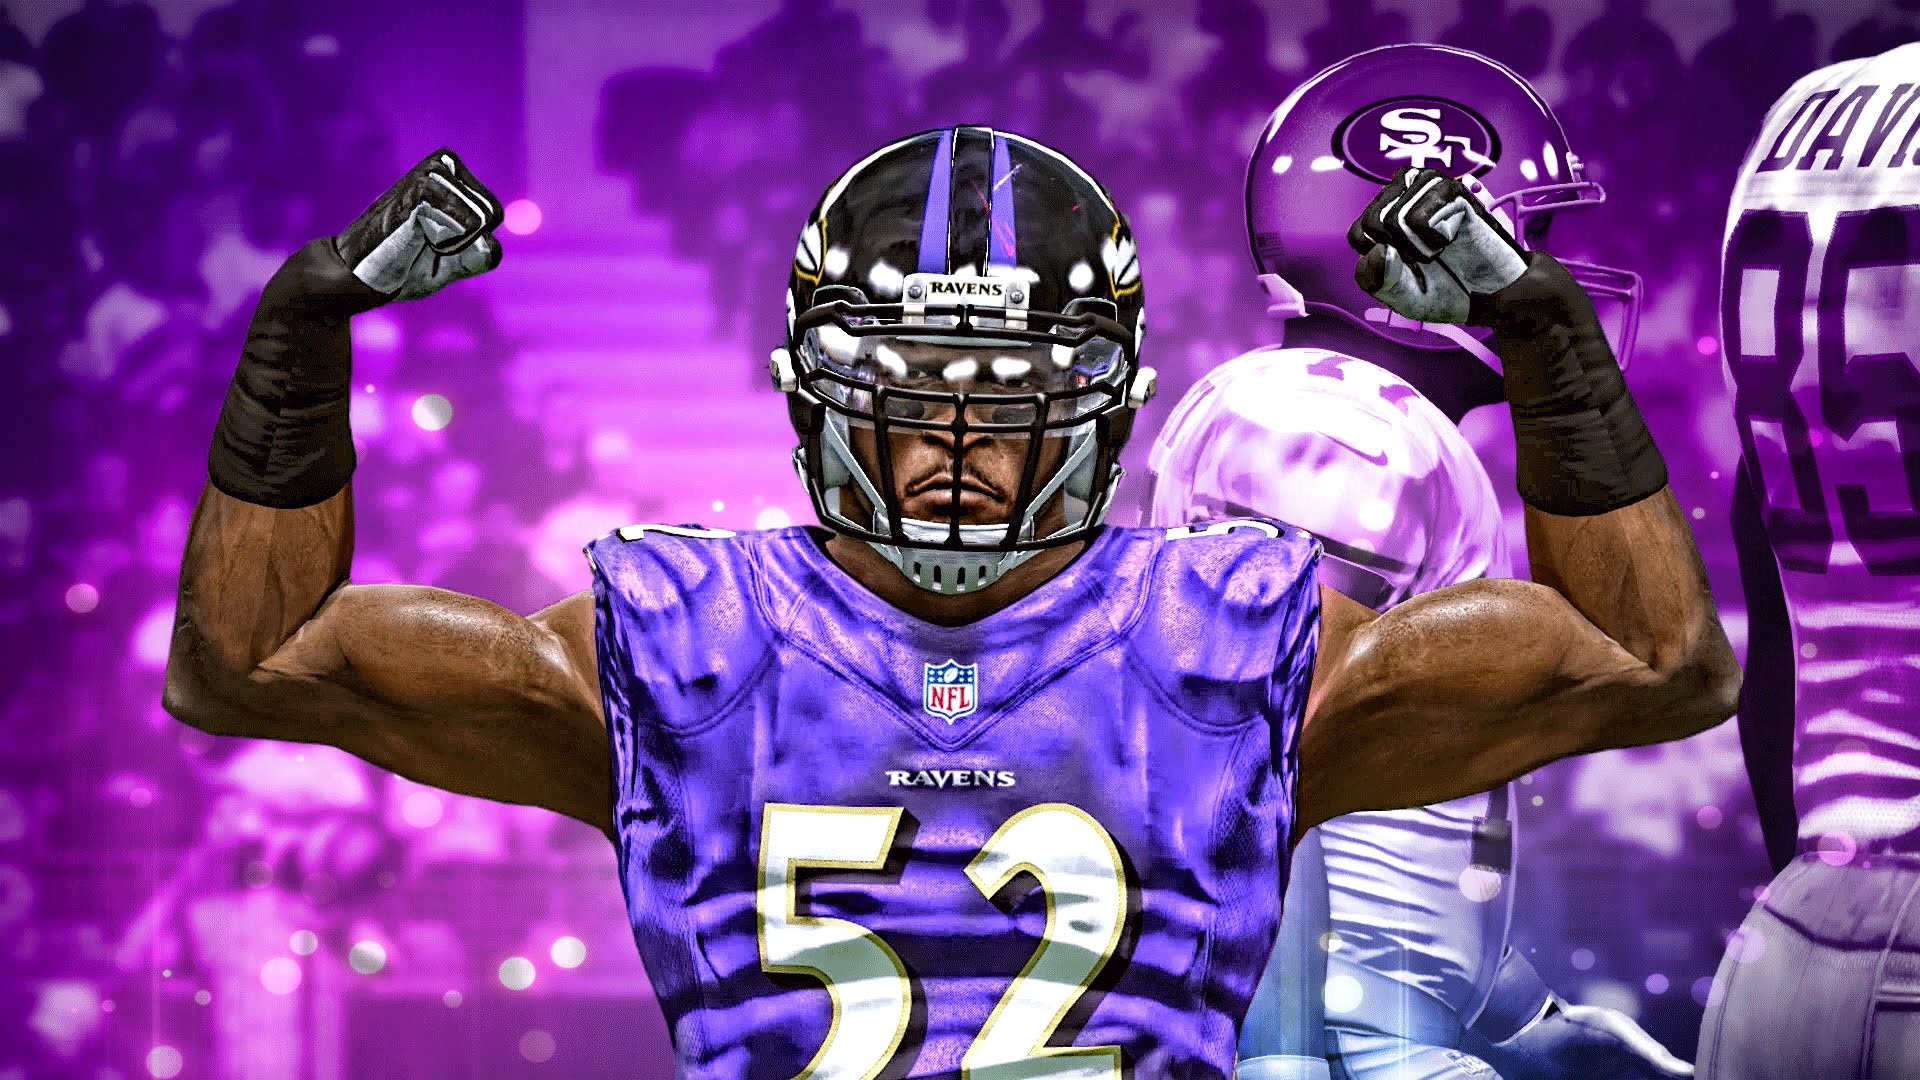 1920x1080 Merry christmas pictures Source Â· Ray lewis wallpapers SF Wallpaper